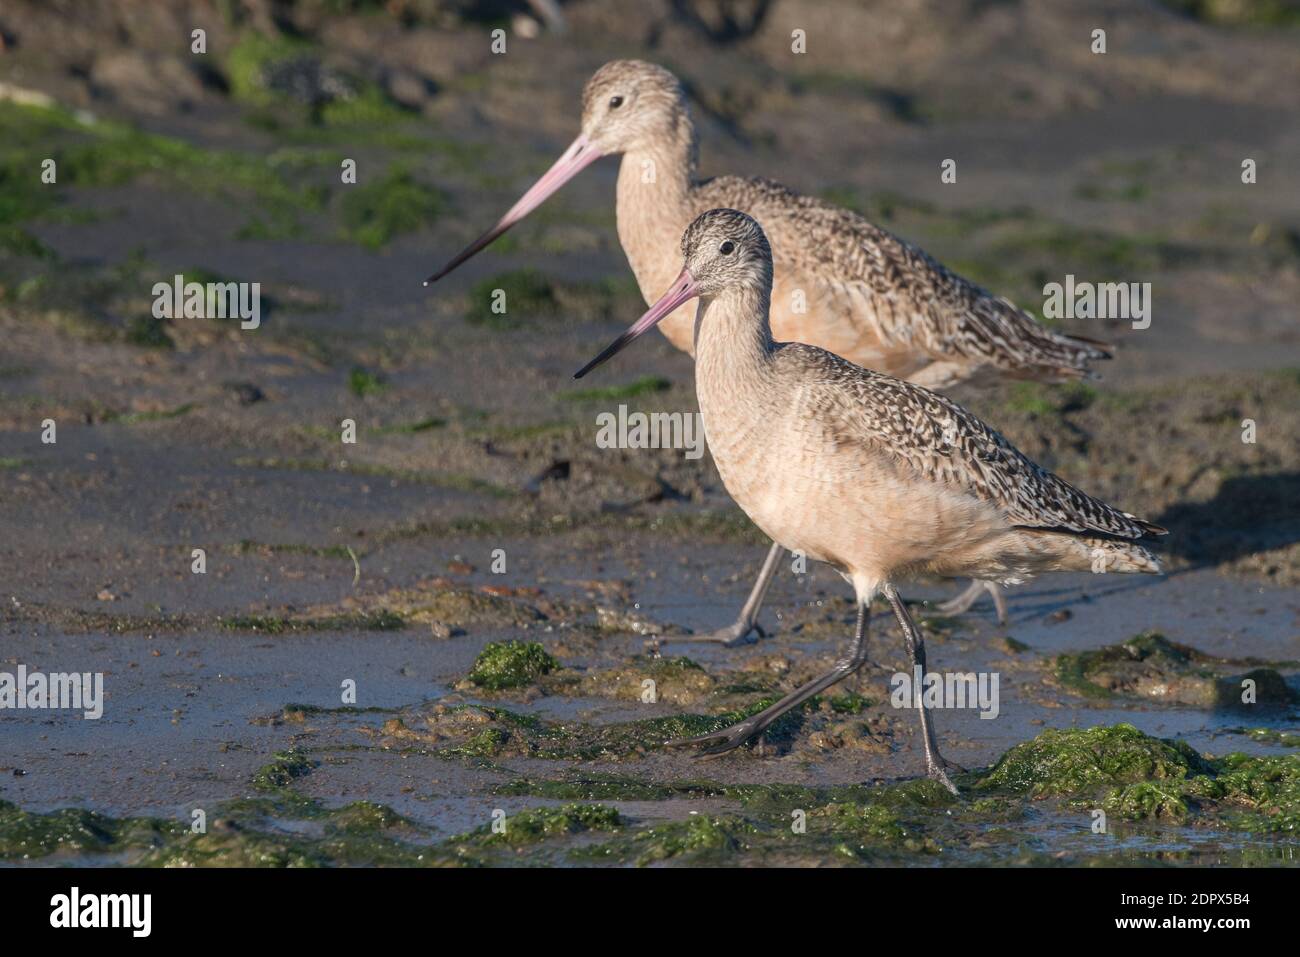 A pair of marbled godwit (Limosa fedoa) walk the edge of elkhorn slough in California searching for small invertebrates to feed on. Stock Photo